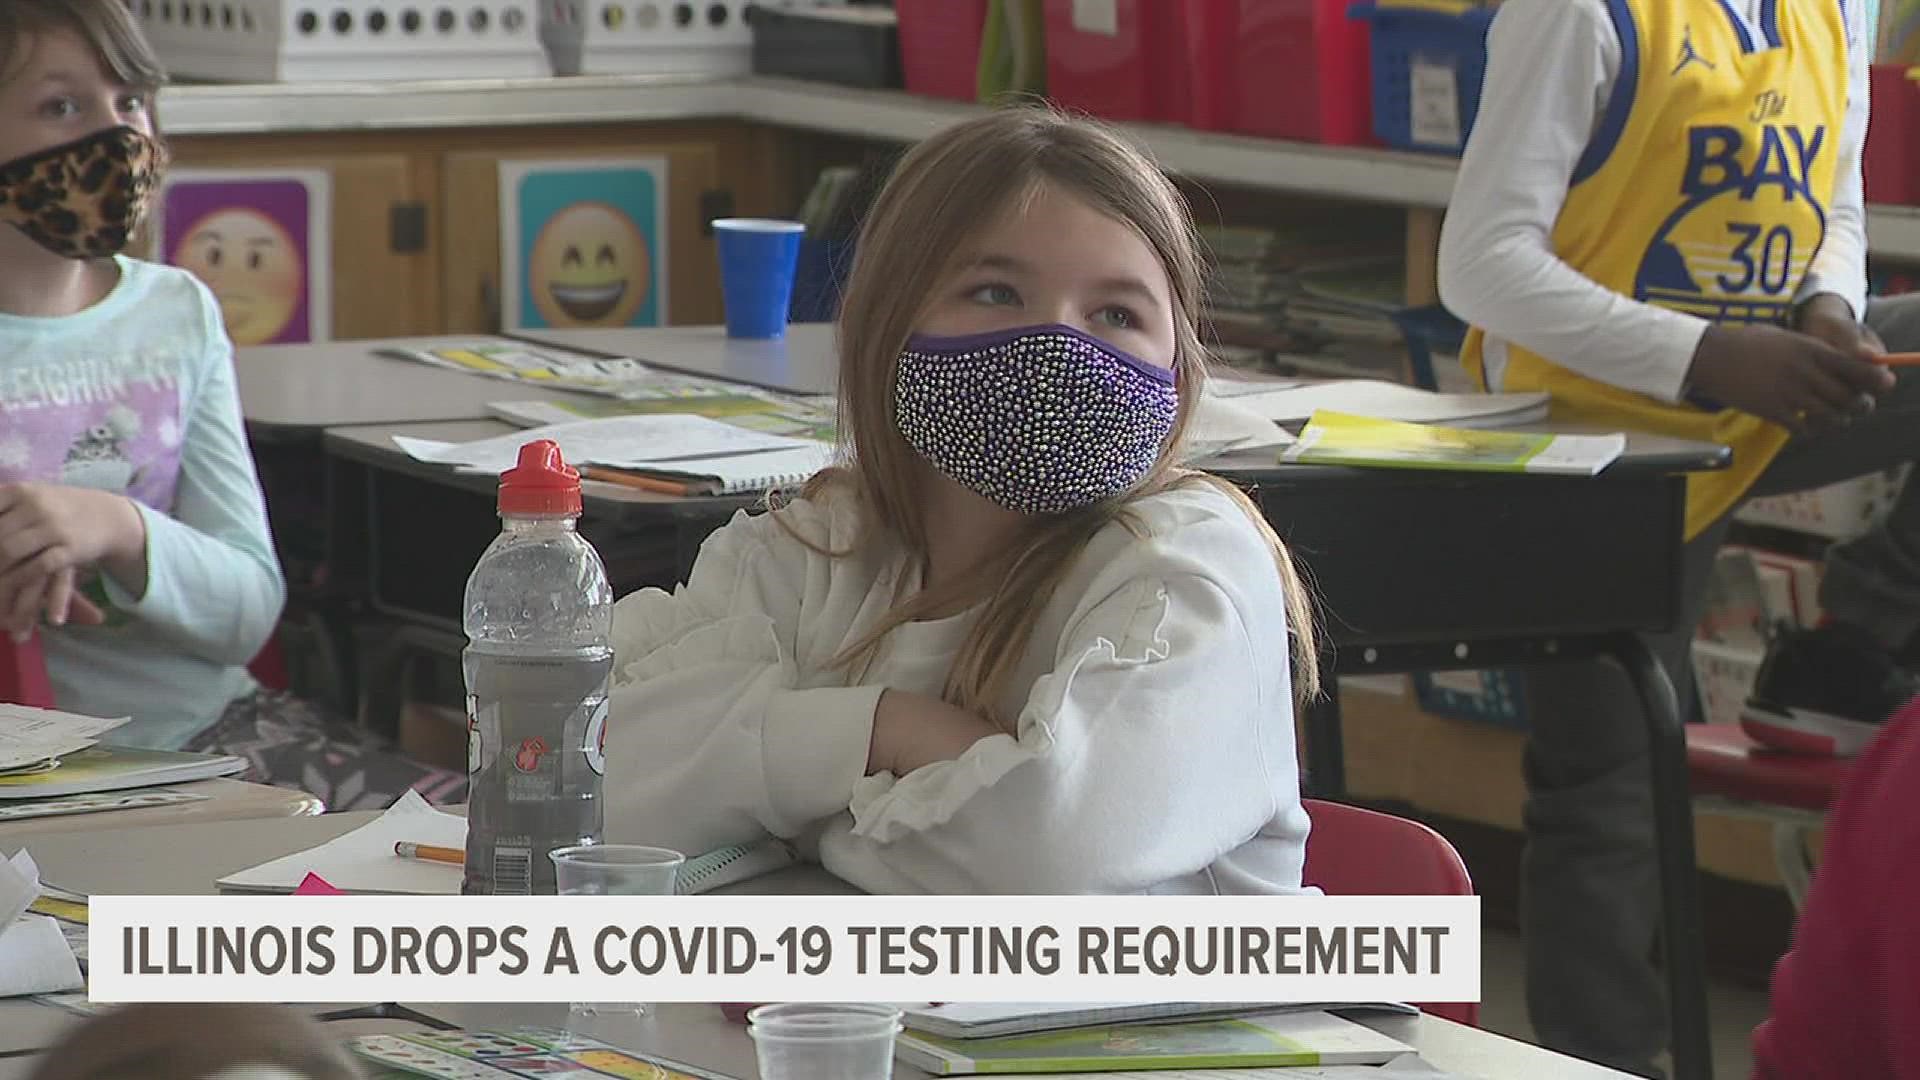 The changes which will take place Friday, Sept. 16, include removing a requirement that unvaccinated workers in schools and child care must test twice weekly.